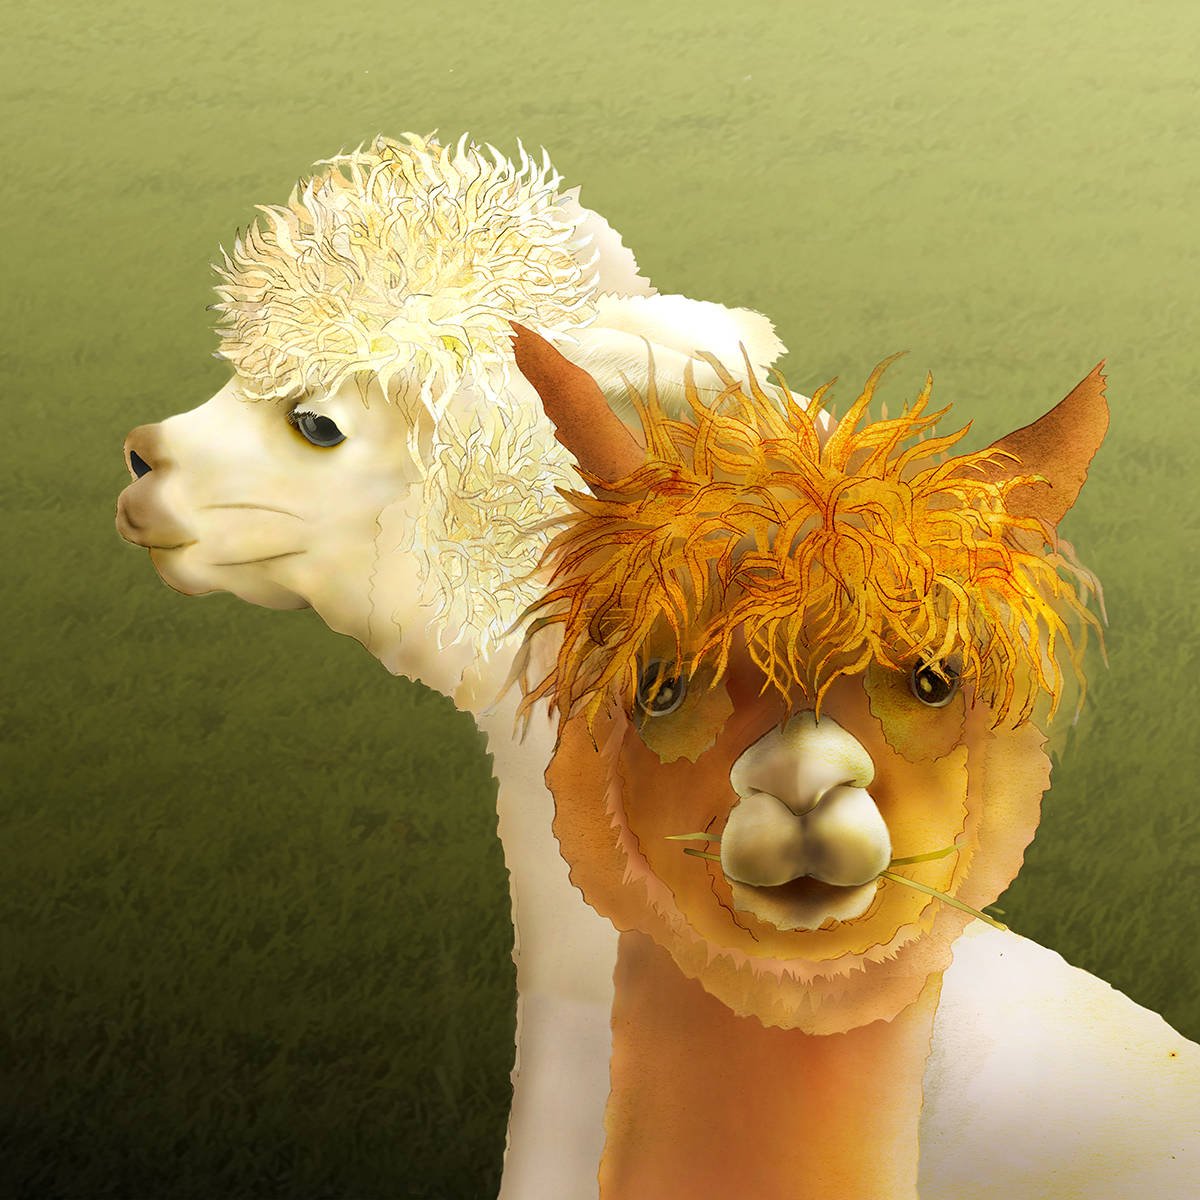 “Alpaca” by Jeannine Chappell